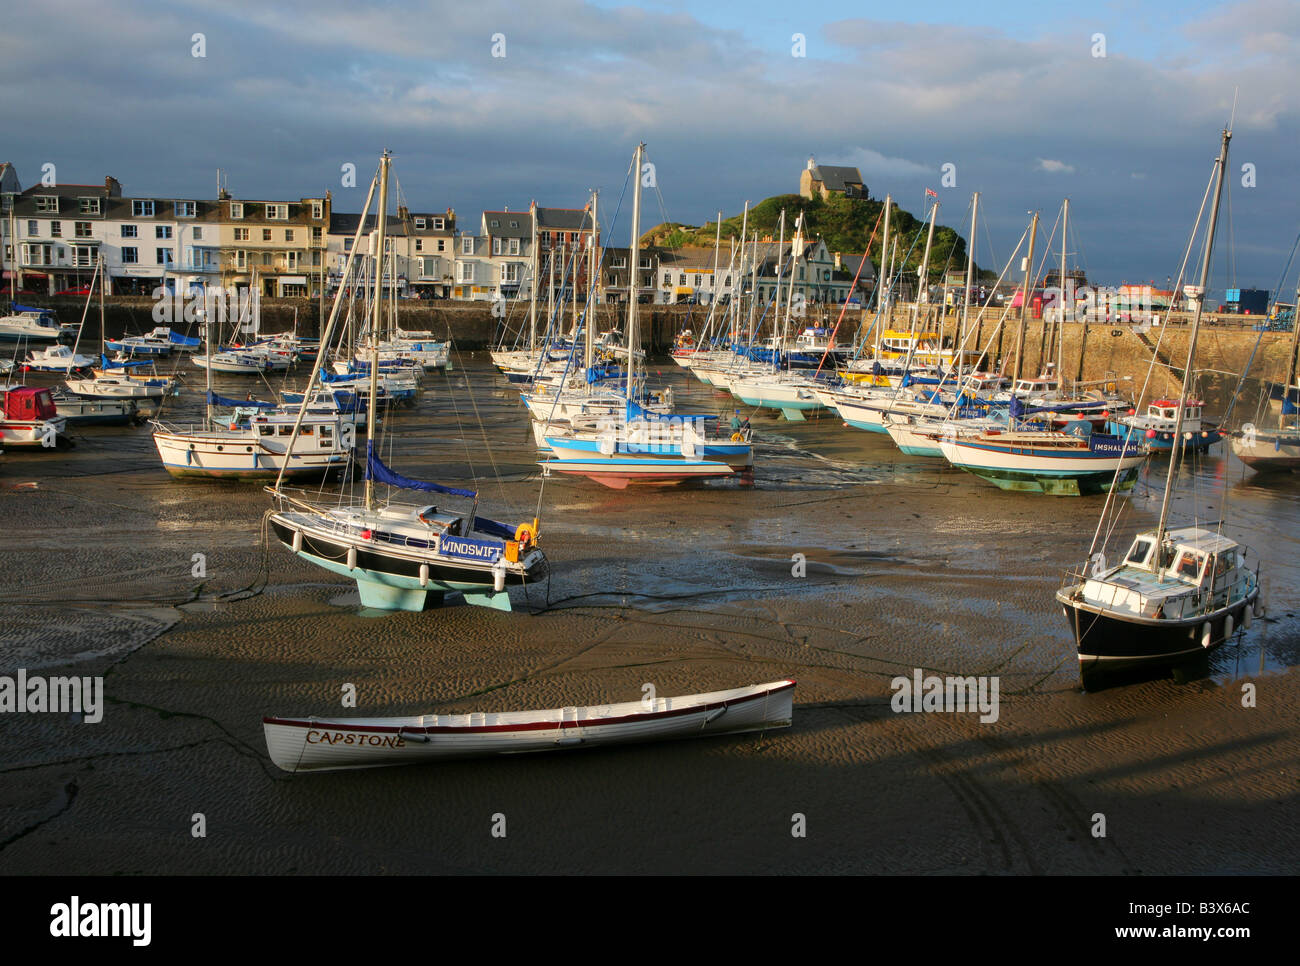 Boats moored at low tide at Ilfracombe harbour, Devon, England during the late afternoon Stock Photo